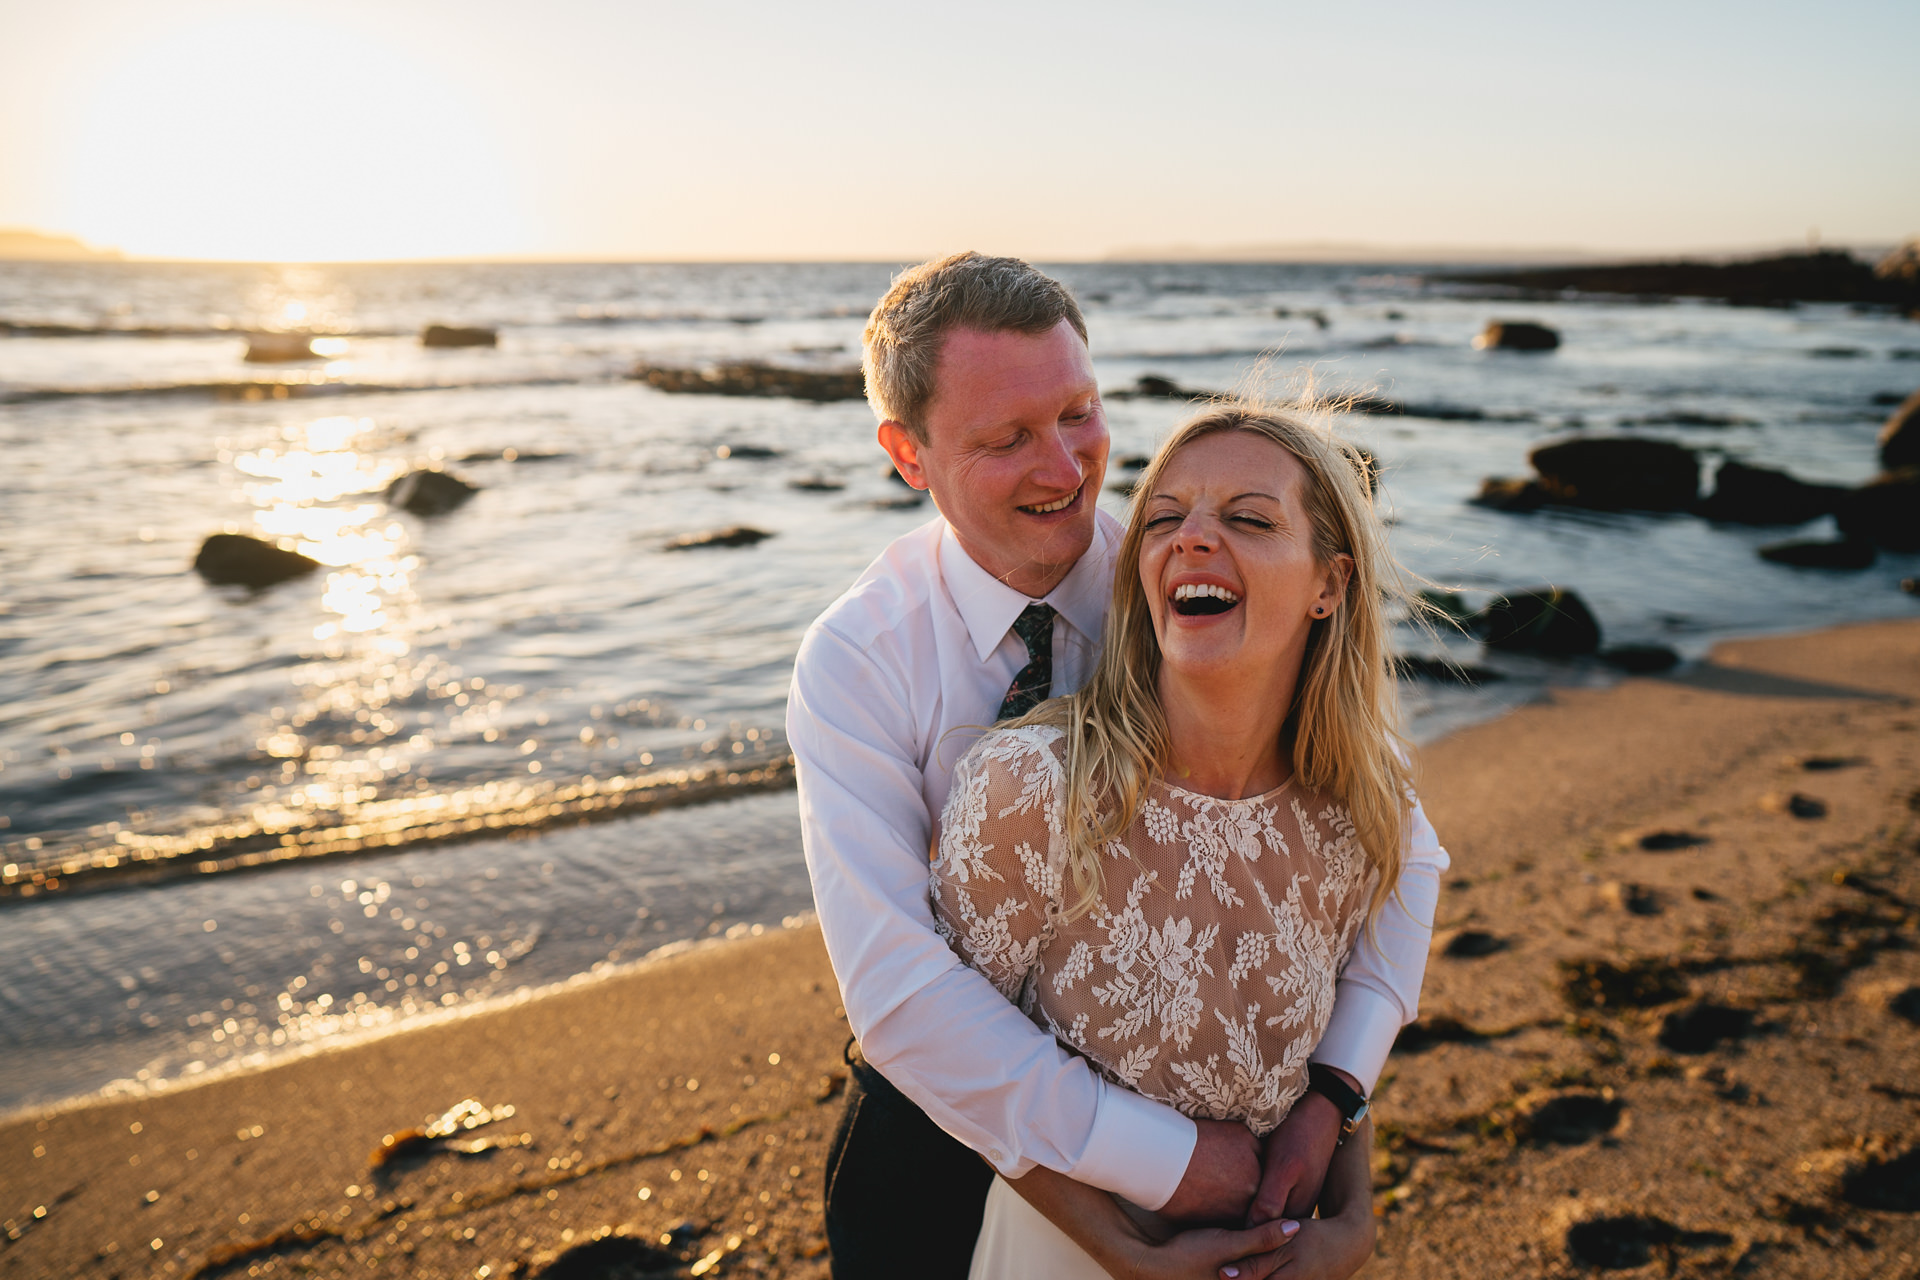 A bride and groom cuddling and laughing together on a beach at sunset